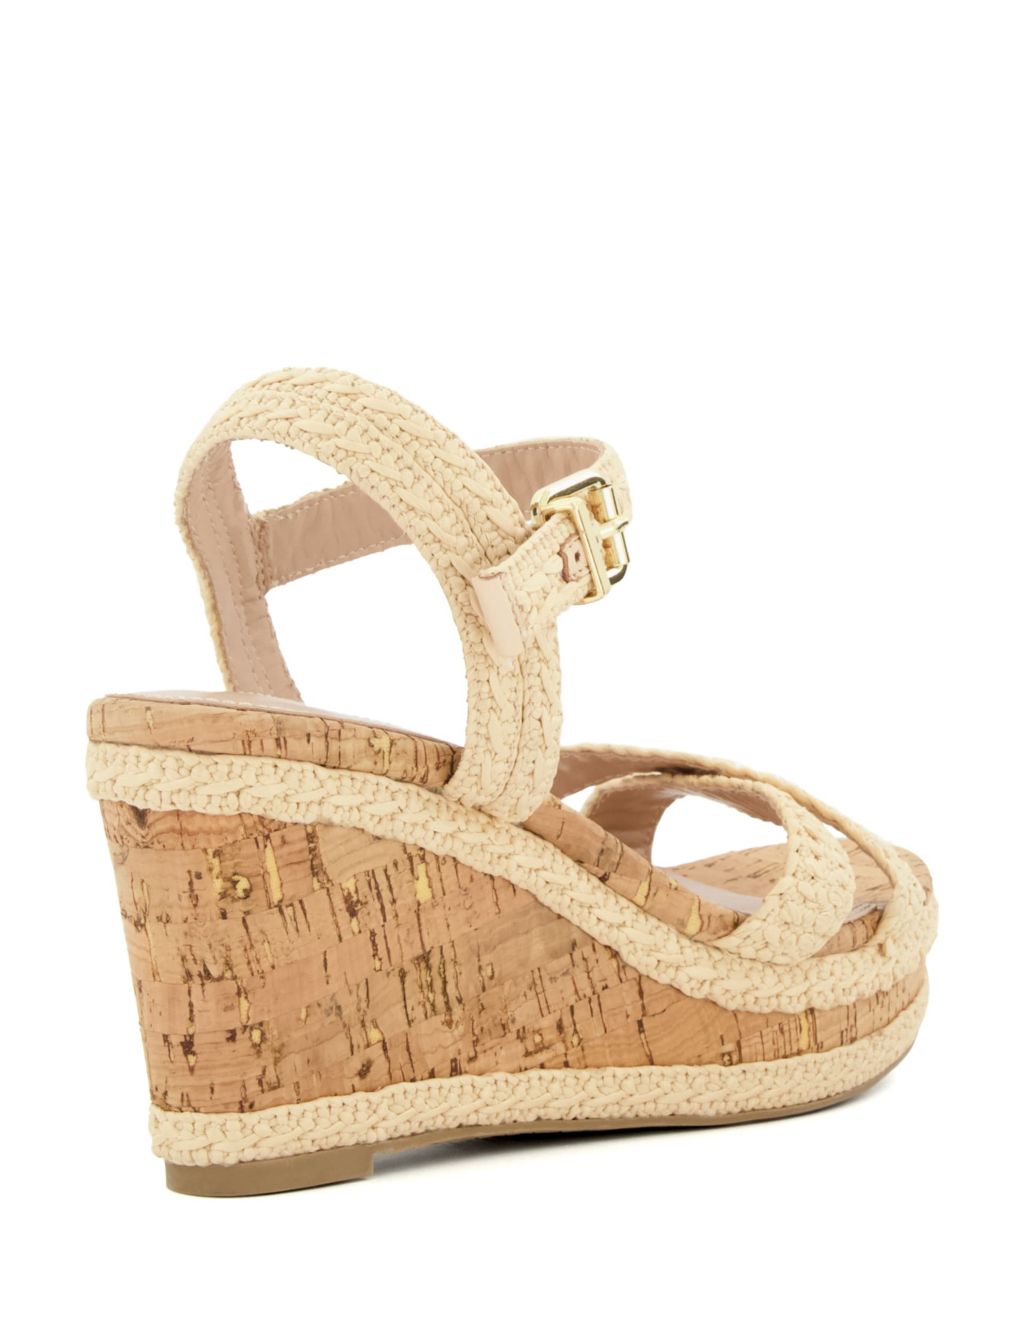 Woven Crossover Ankle Strap Wedge Sandals image 4